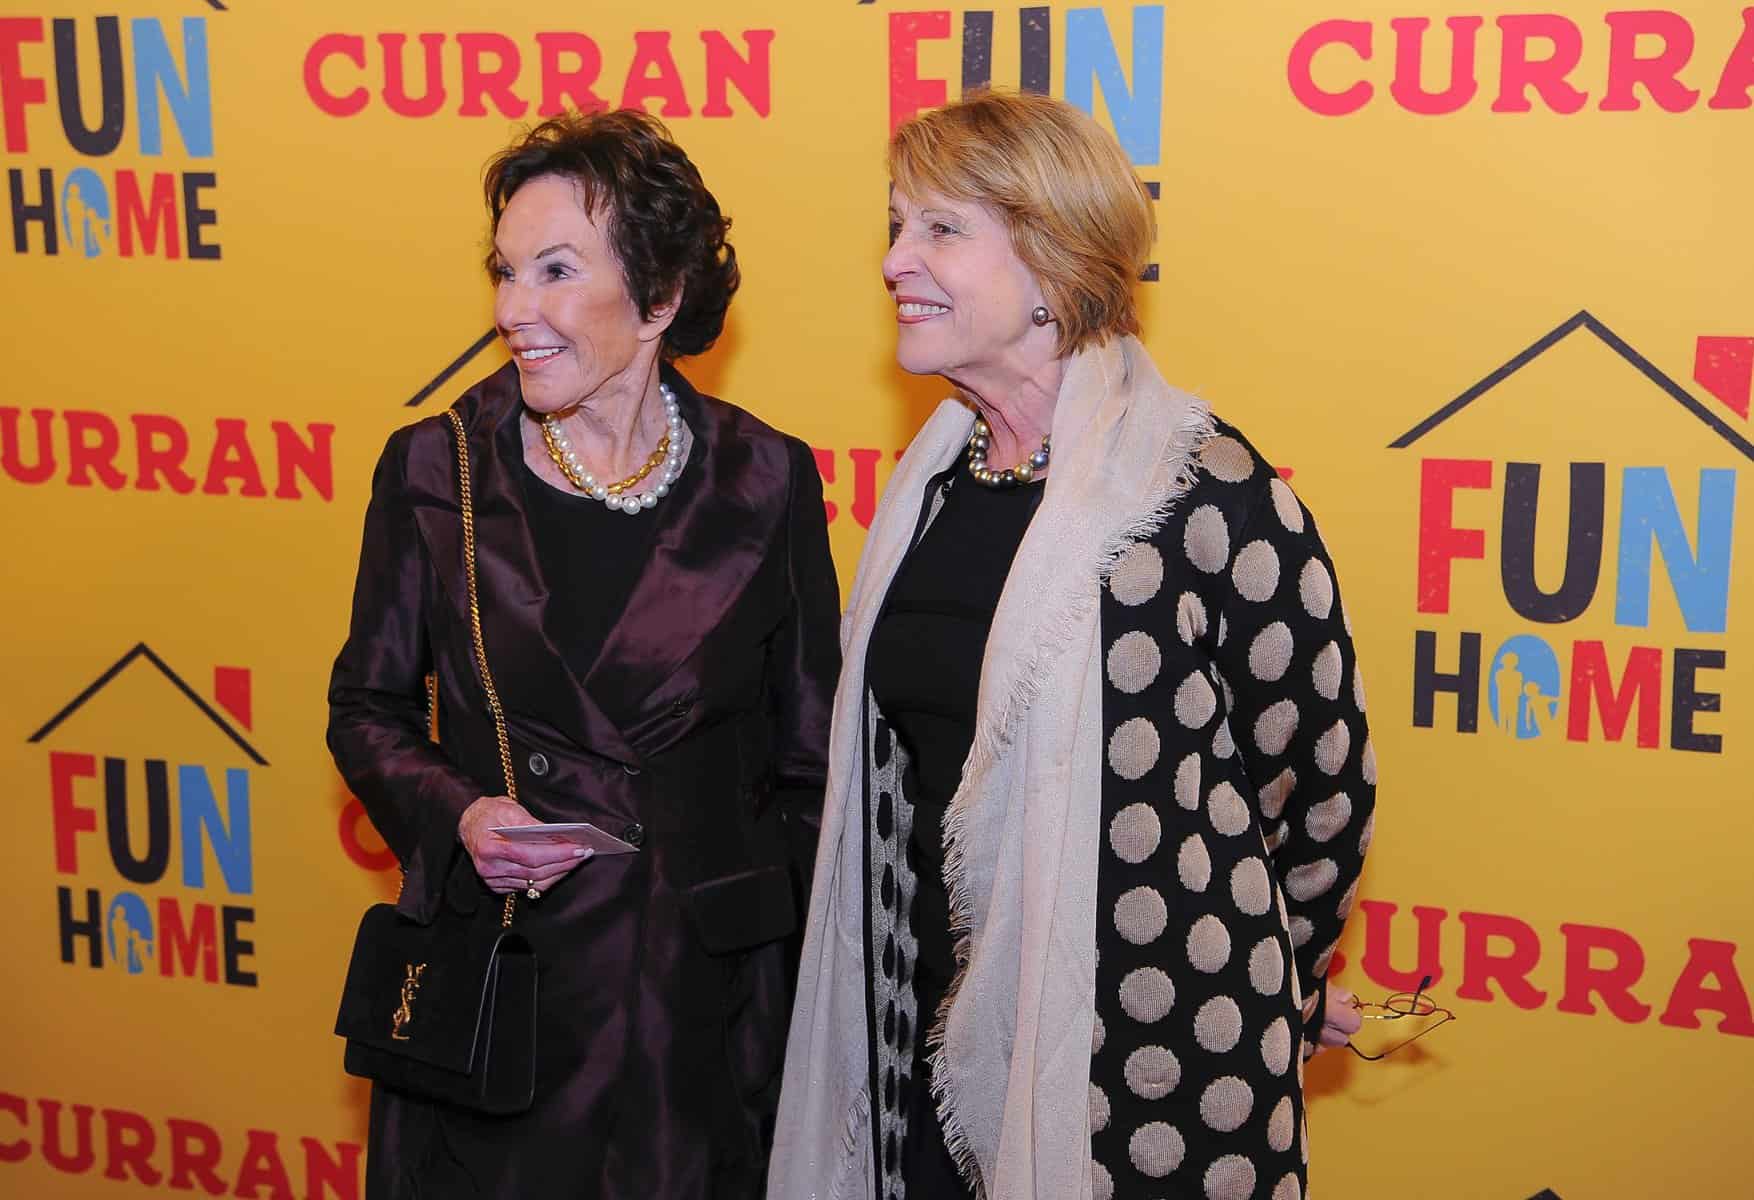 curran-theater-re-opens-with-fun-home